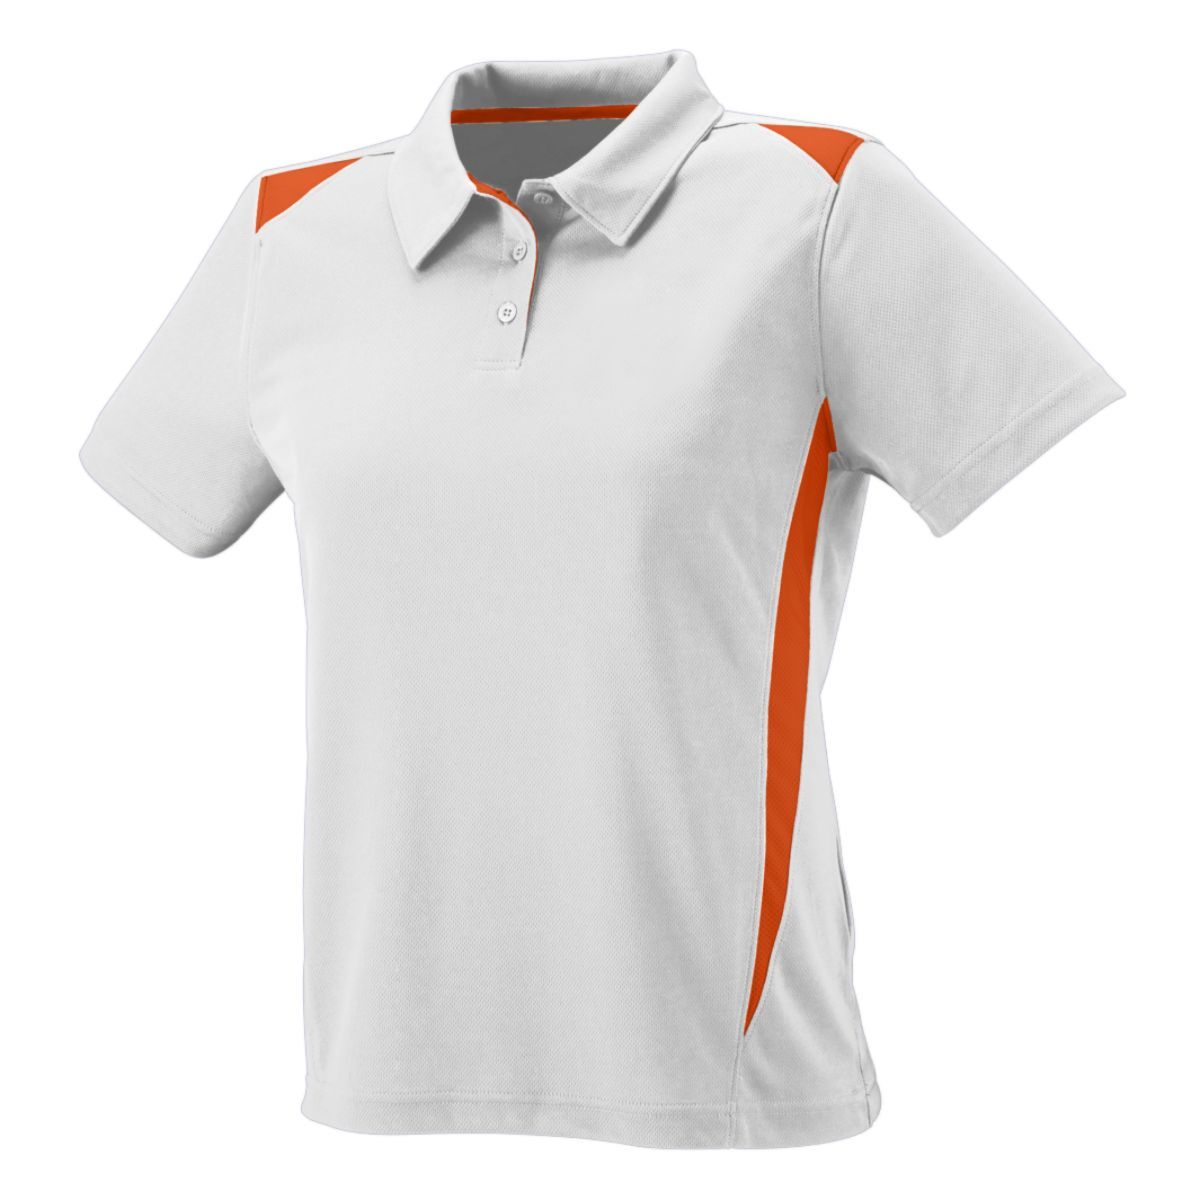 Augusta Sportswear Ladies Premier Polo in White/Orange  -Part of the Ladies, Ladies-Polo, Polos, Augusta-Products, Shirts product lines at KanaleyCreations.com